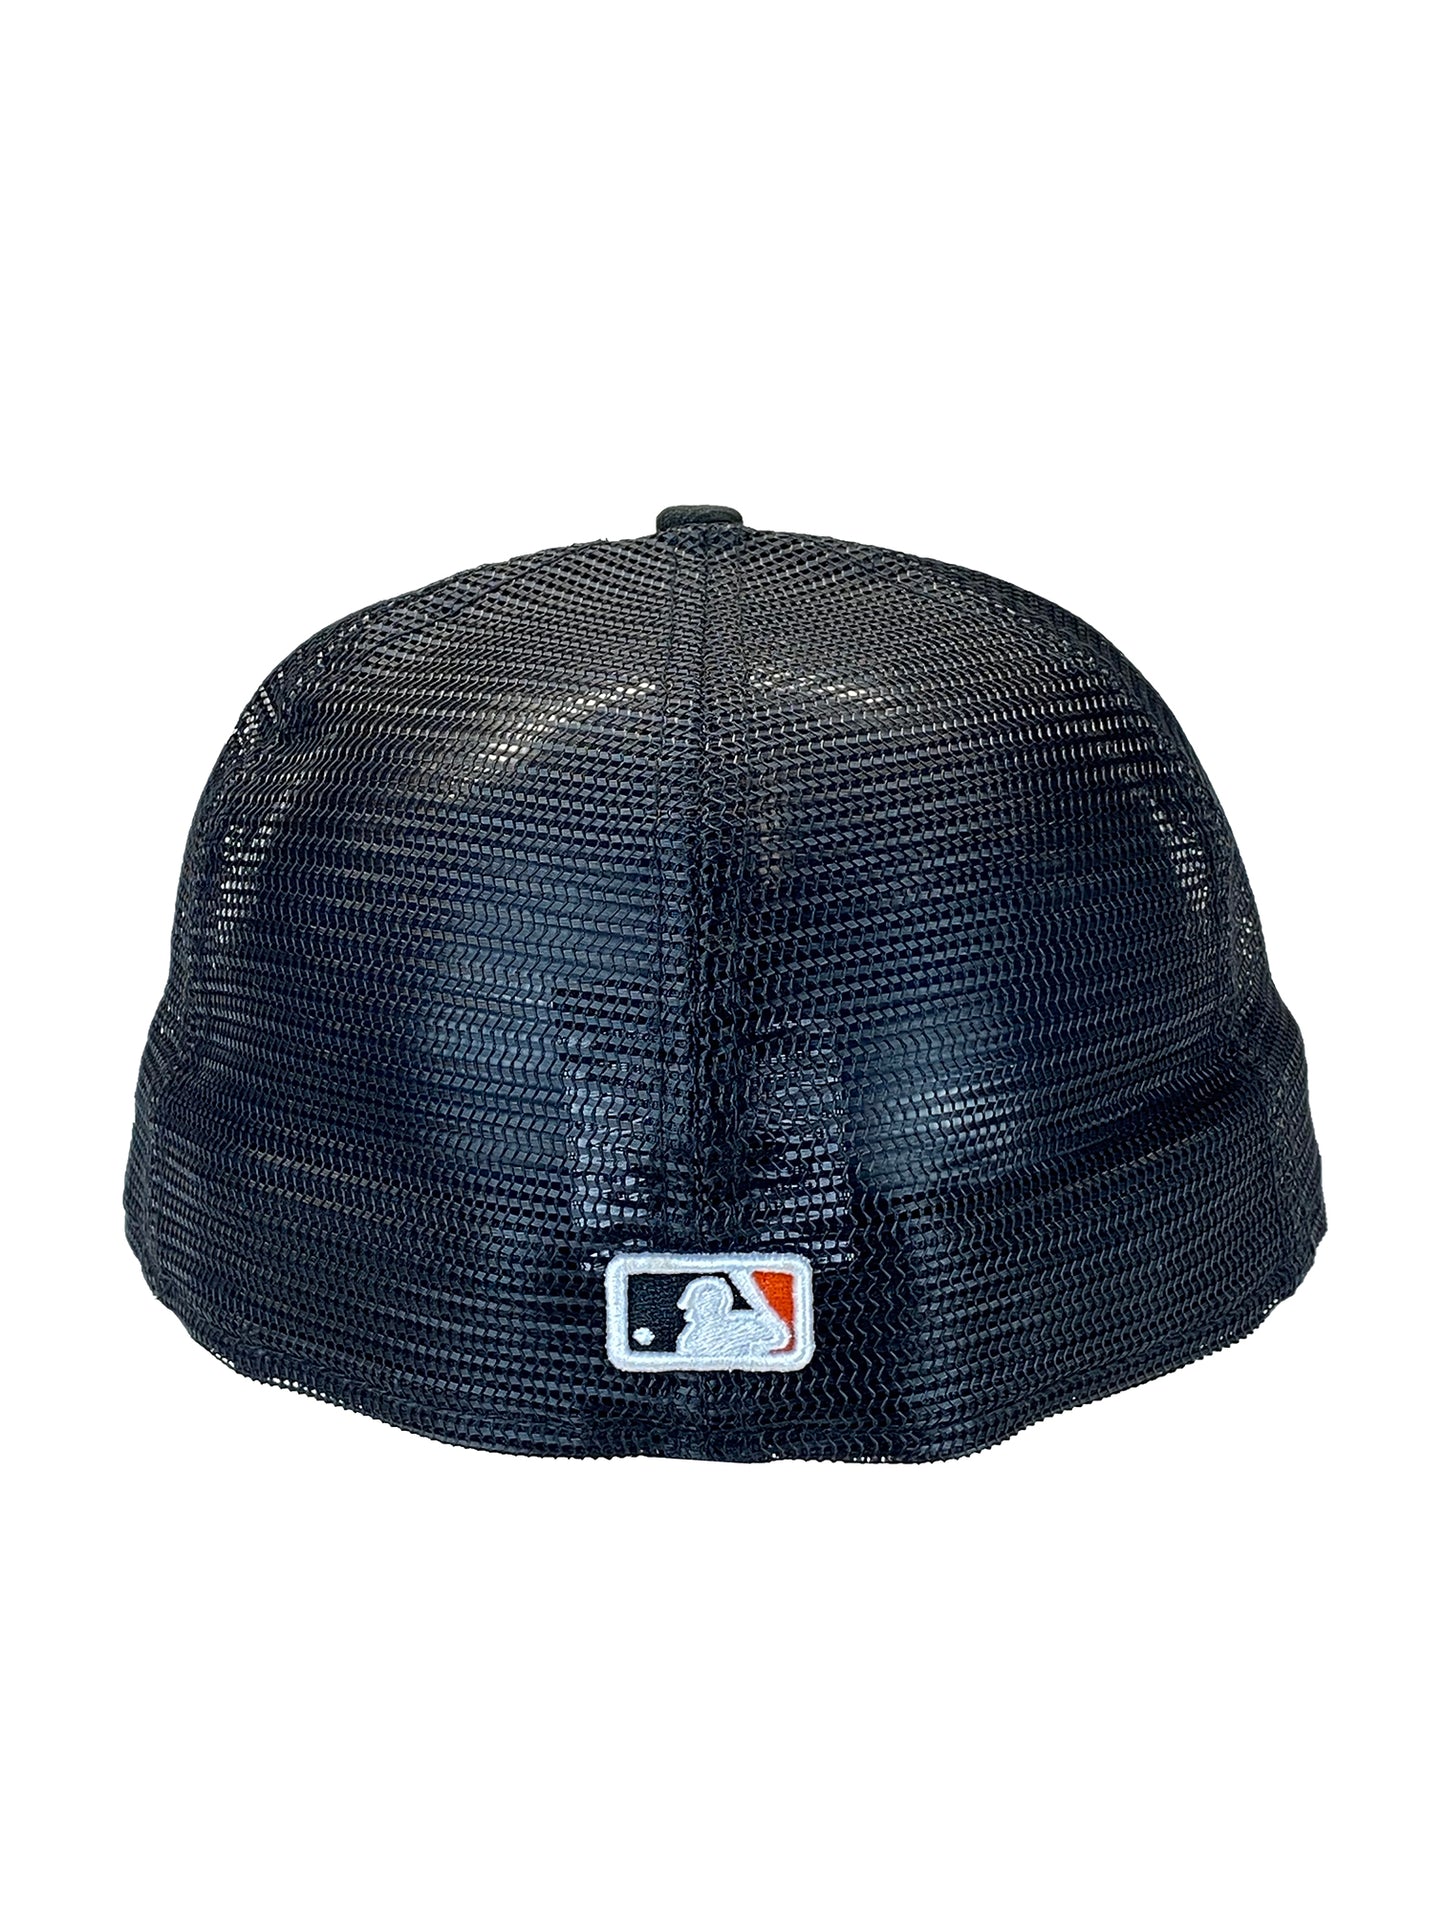 SAN FRANCISCO GIANTS CLASSIC TRUCKER 59FIFTY FITTED